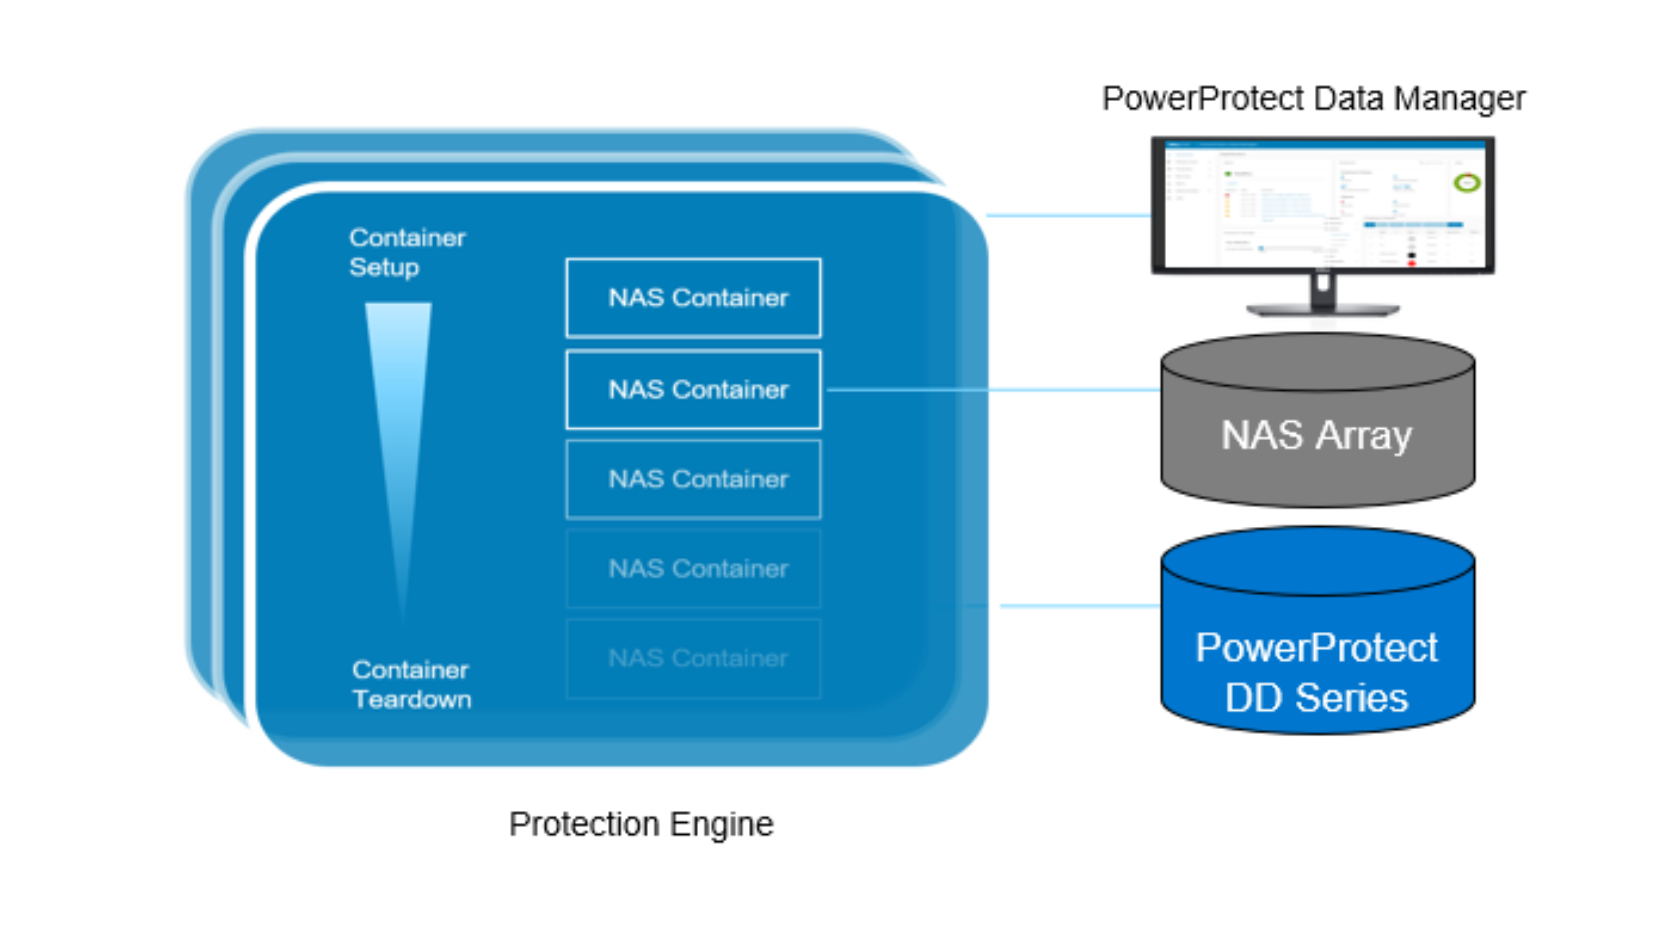 Image showing auto distribution of backup streams to PowerProtect DD series appliance